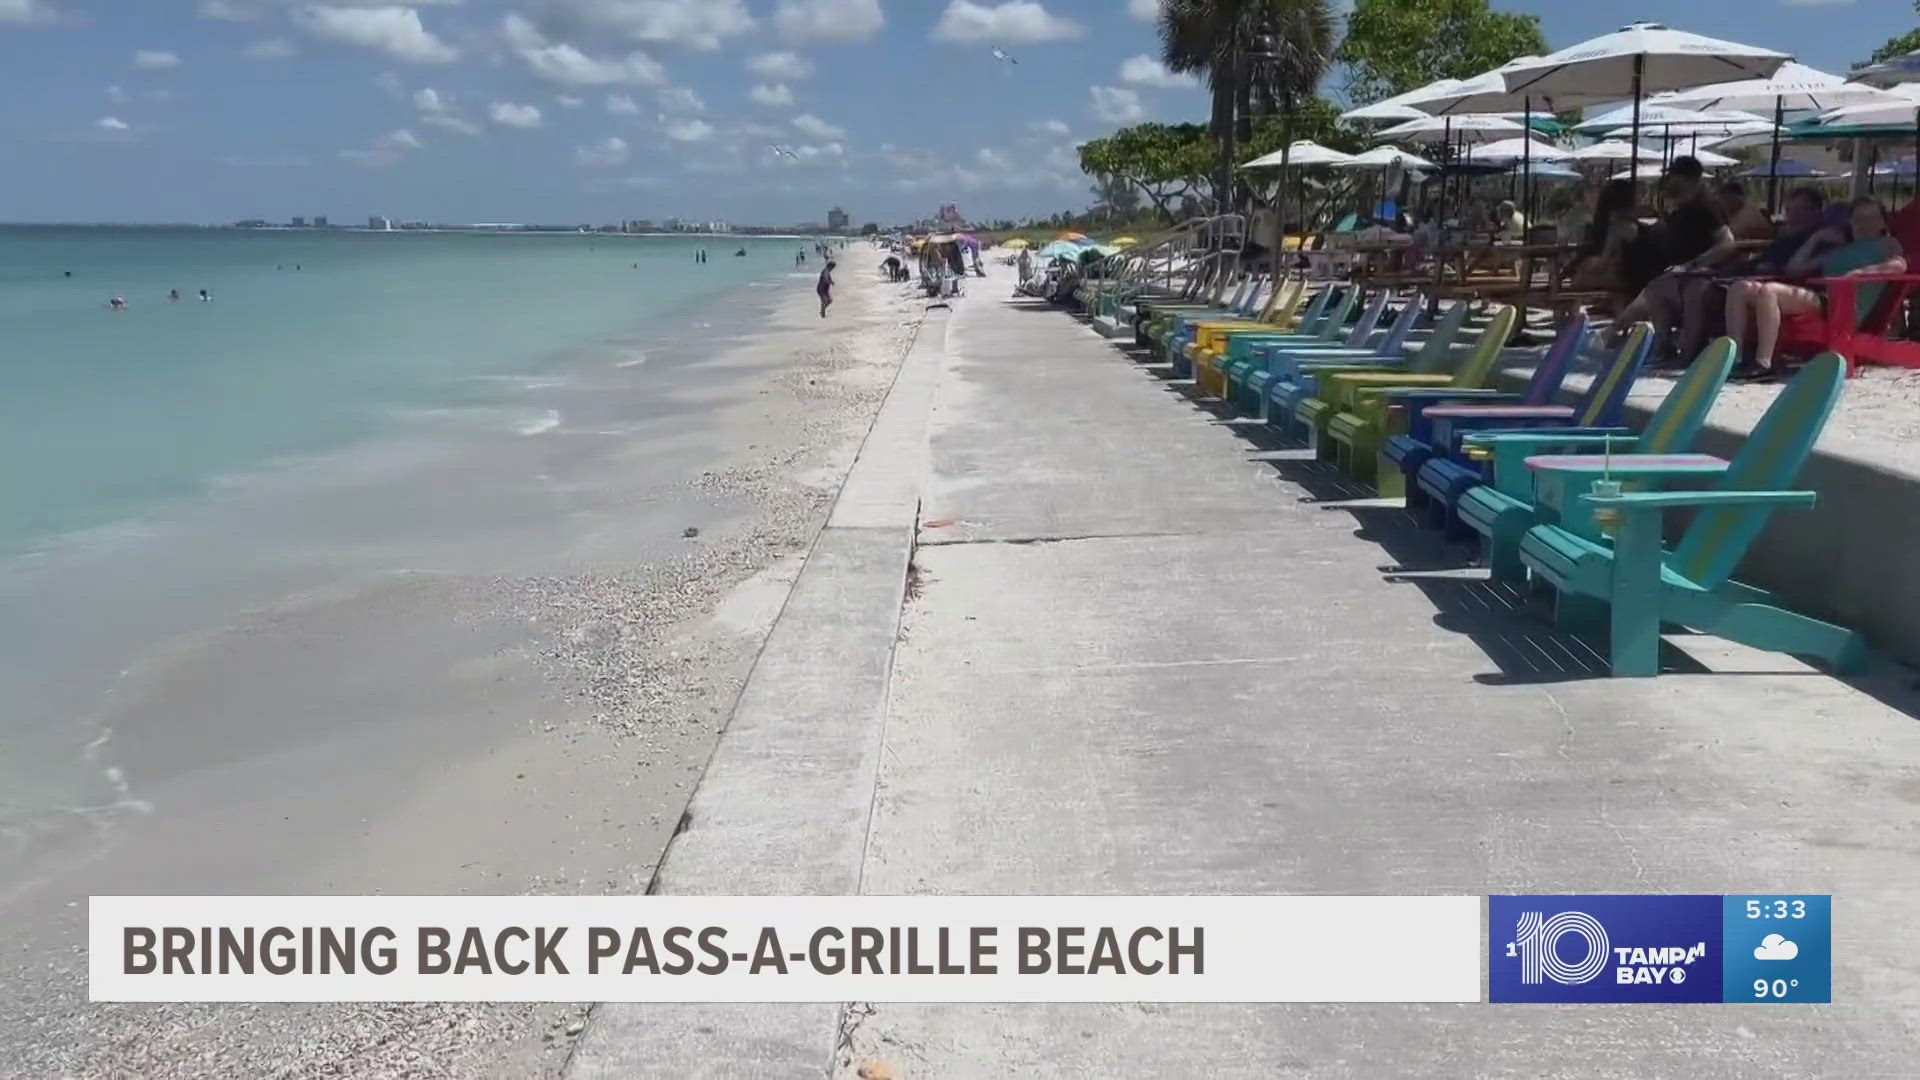 Pass-a-Grille has suffered some major erosion over the last couple of years, but recently the dunes were restored. Now, they’re planning to extend the beach as well.